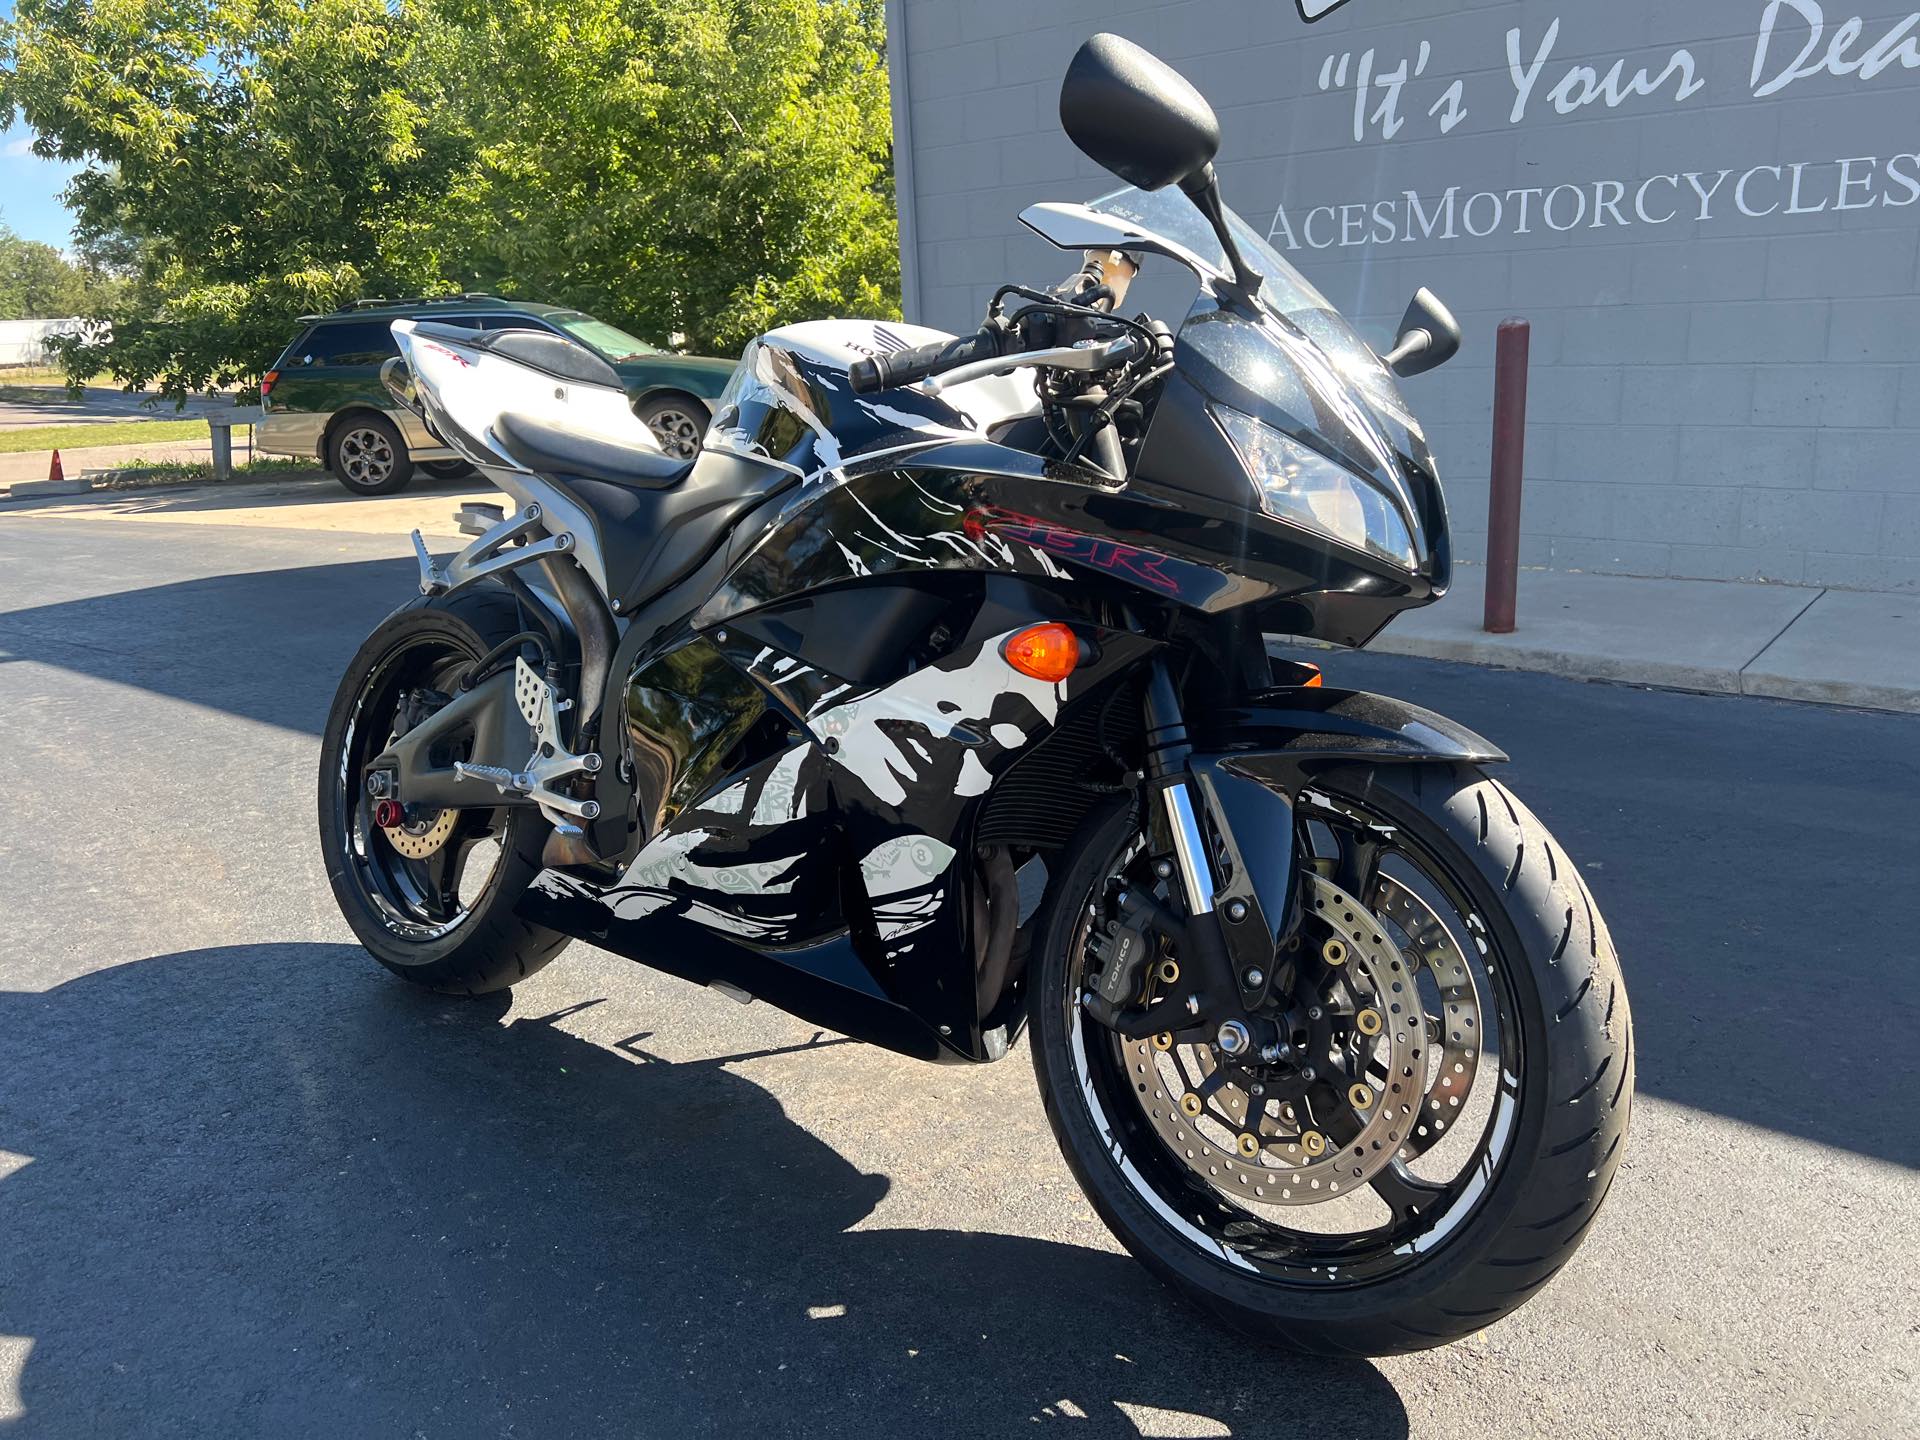 2010 Honda CBR 600RR at Aces Motorcycles - Fort Collins